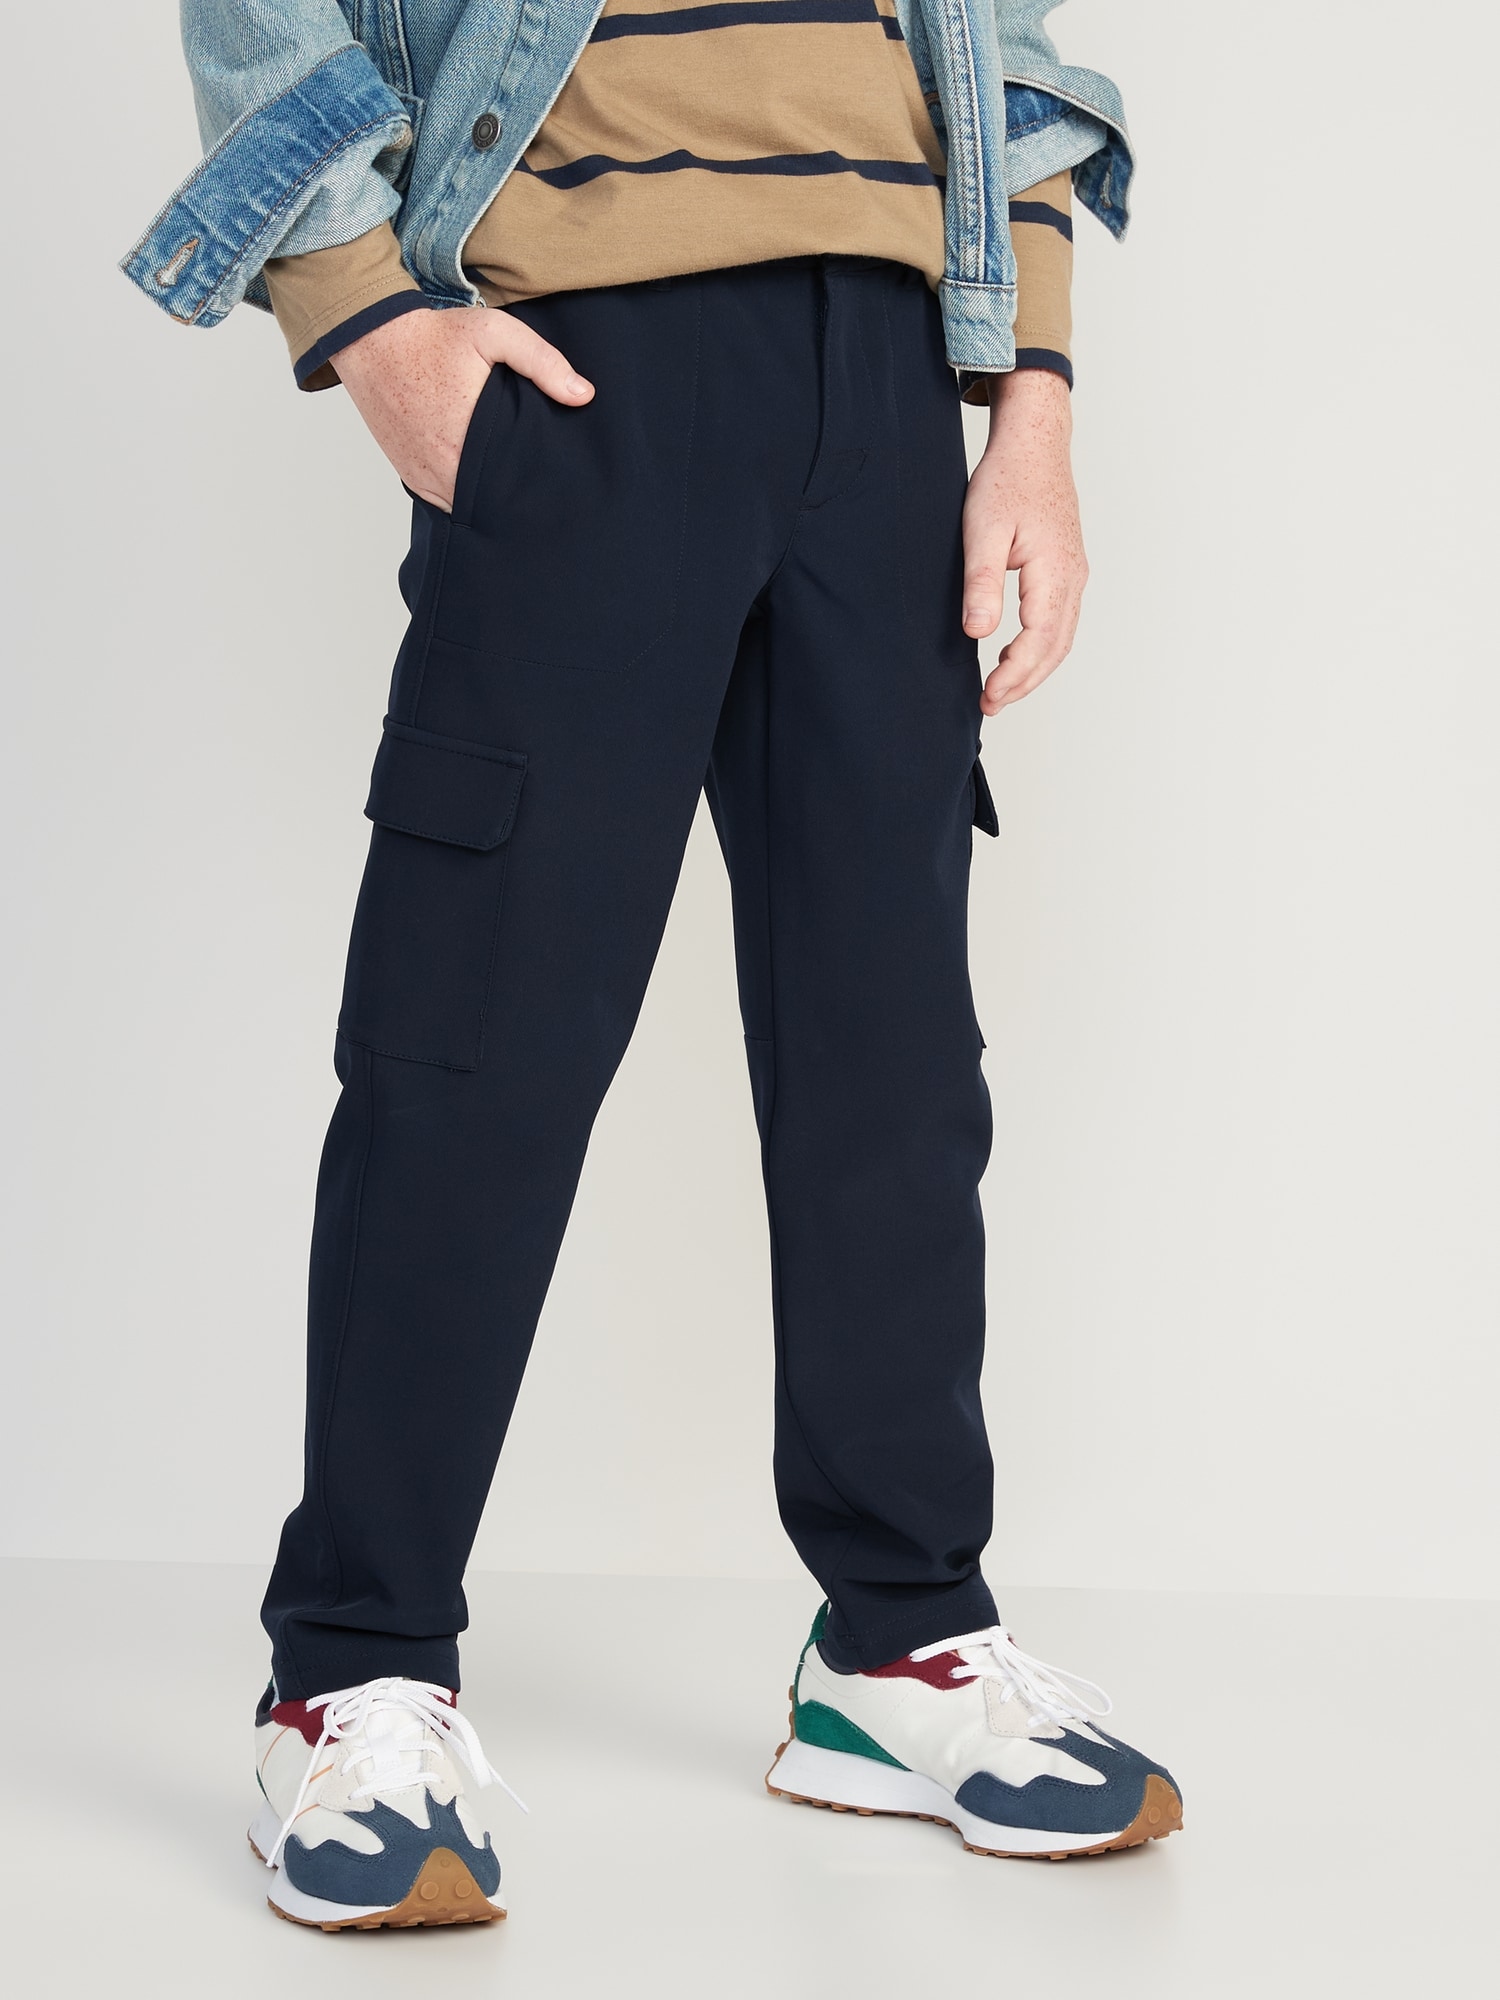 StretchTech Tapered Cargo Performance Pants for Boys | Old Navy